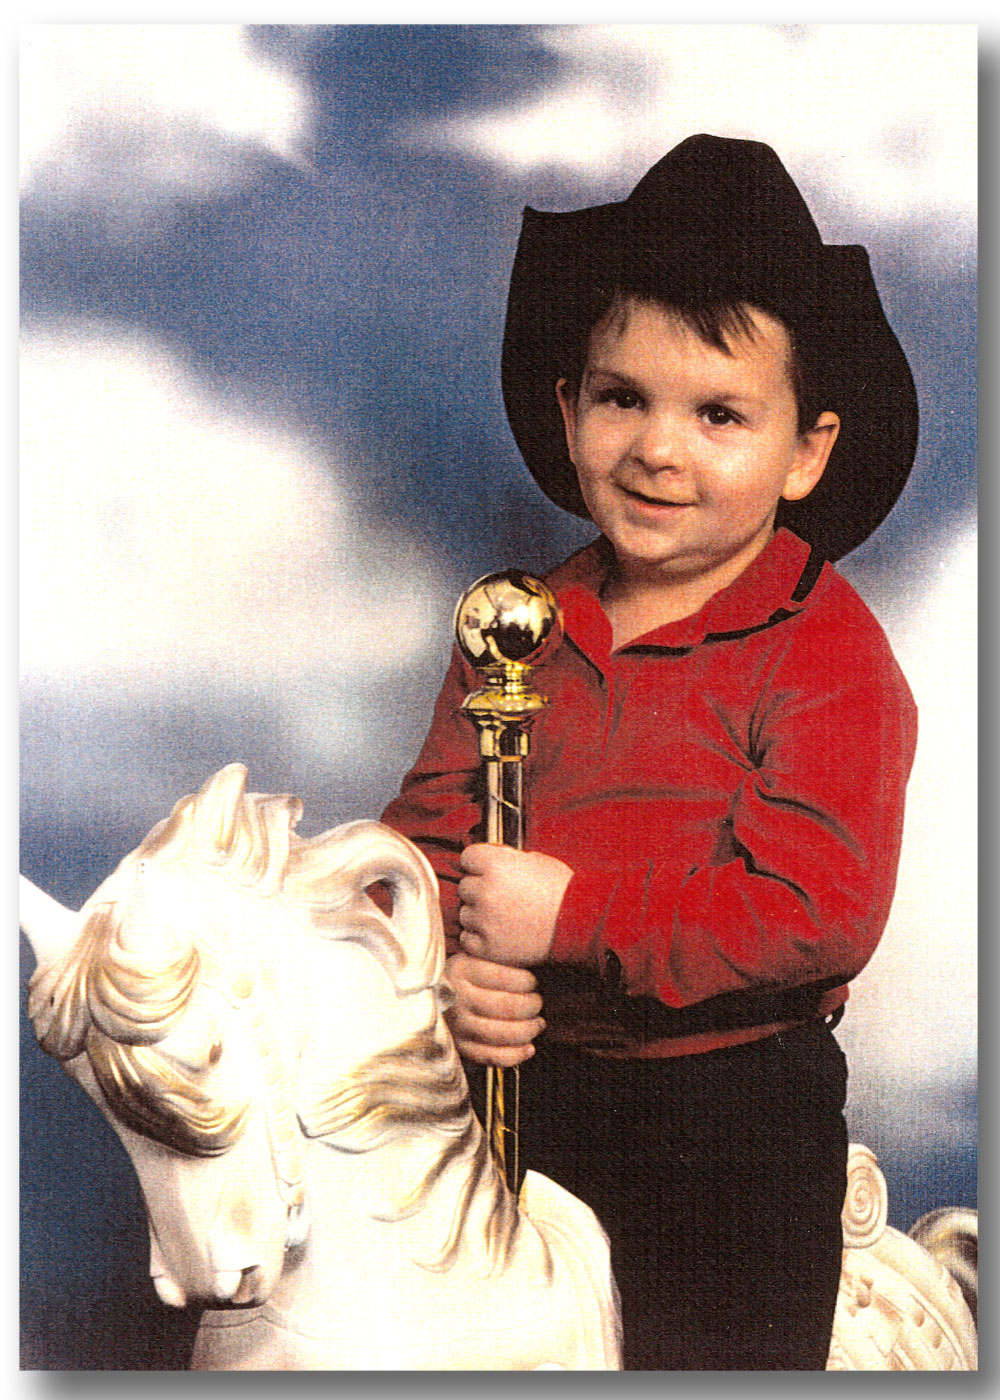 Photo of Brock Walquist riding a horse